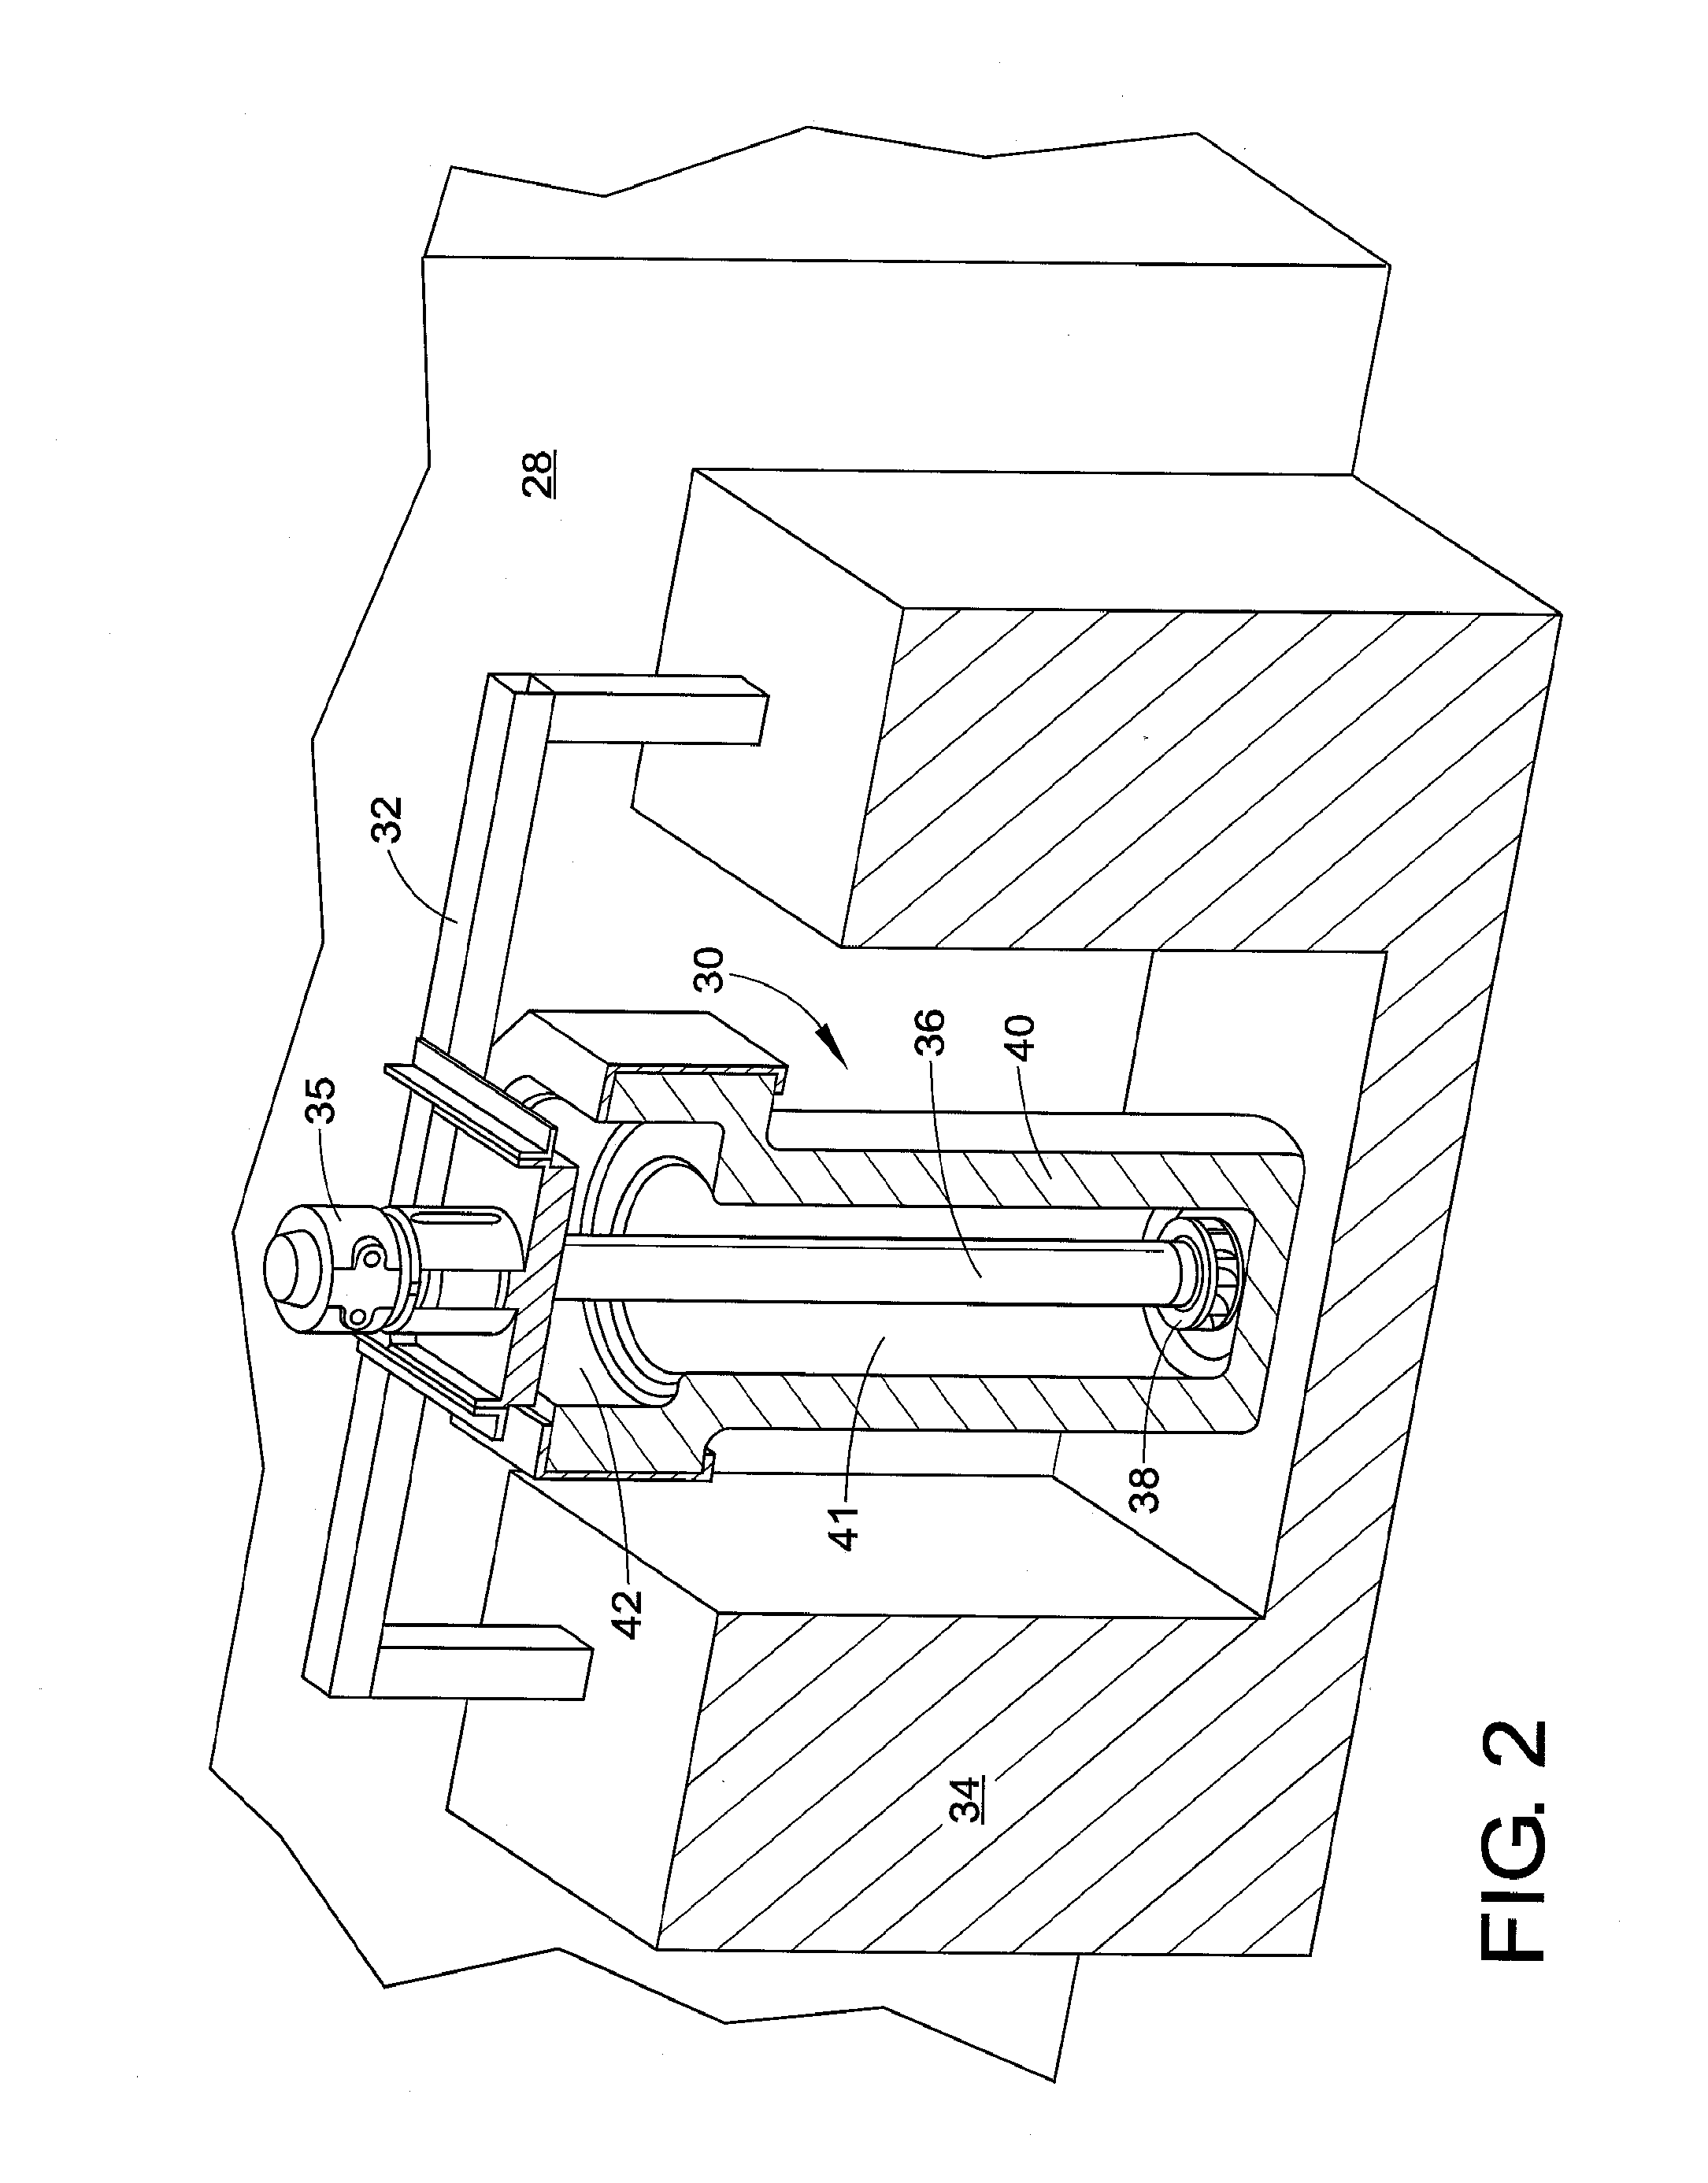 Overflow molten metal transfer pump with gas and flux injection